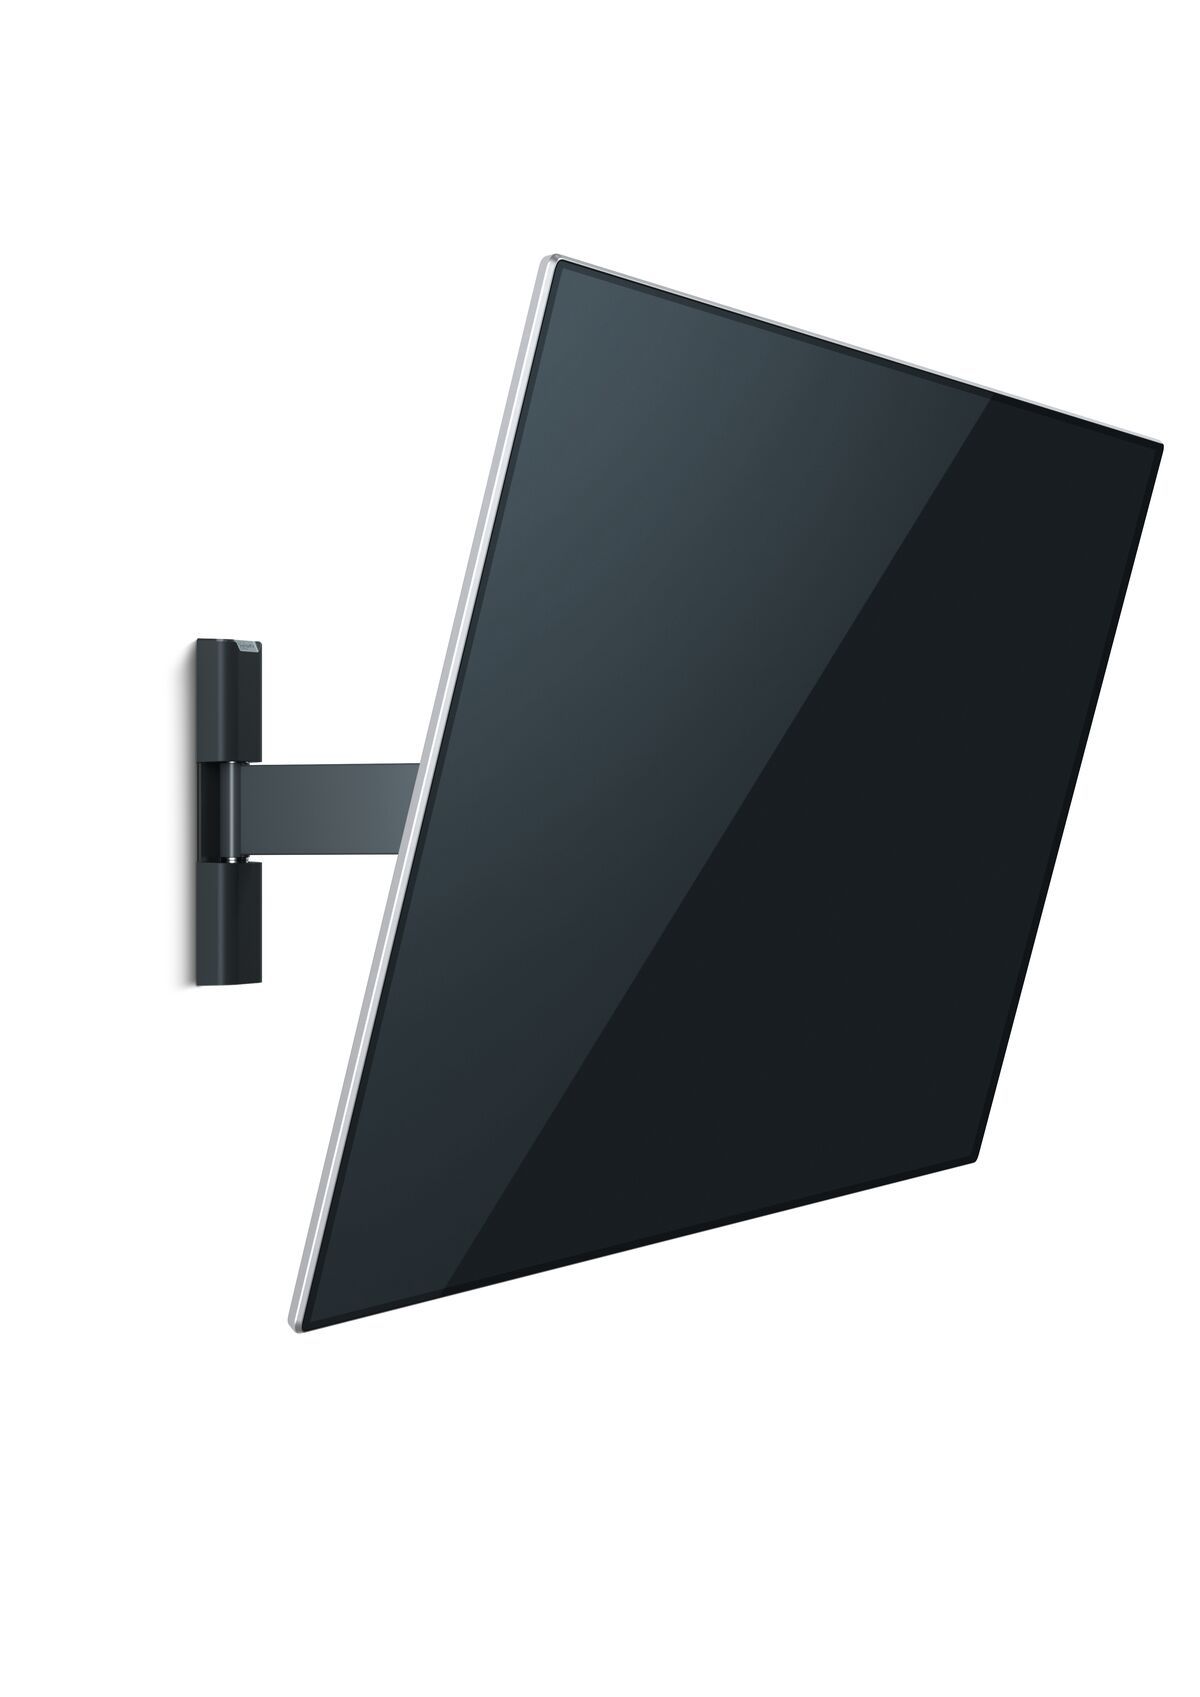 Vogel's THIN 525 ExtraThin Full-Motion TV Wall Mount - Suitable for 40 up to 65 inch TVs - Motion (up to 120°) - Tilt up to 20° - Application